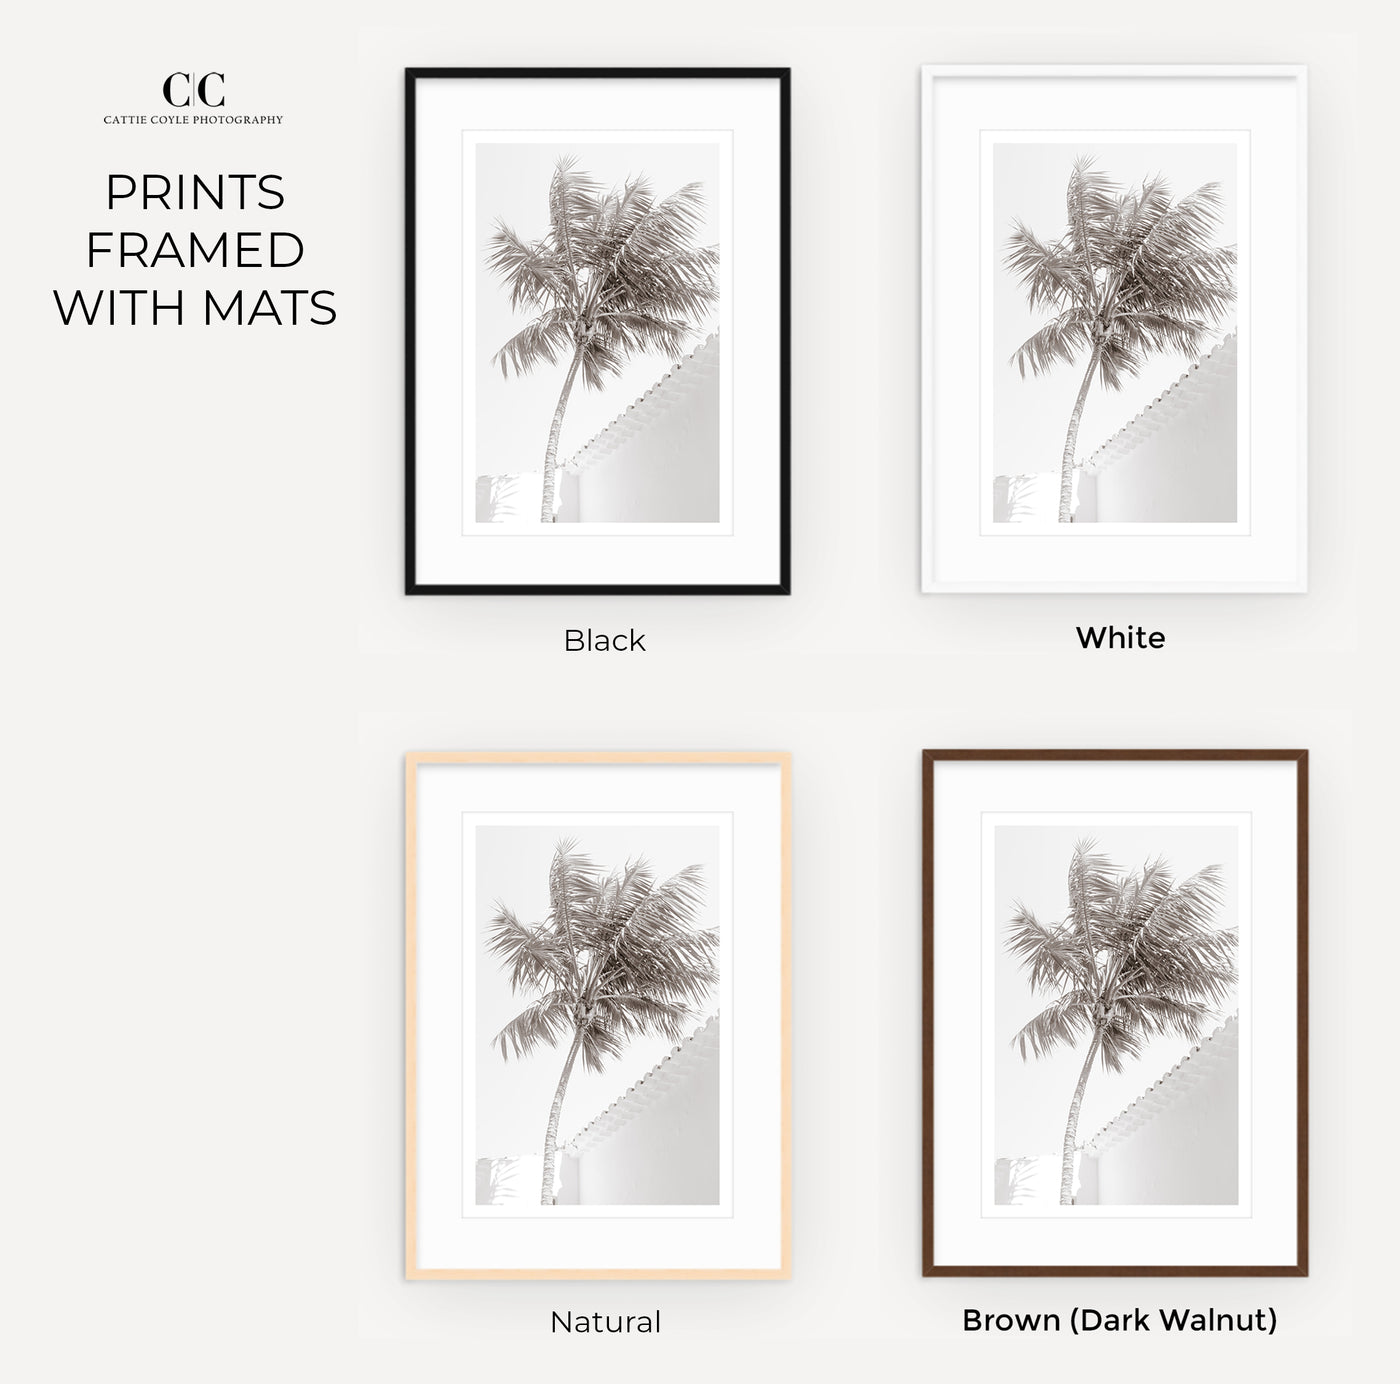 Black and white wall art by Cattie Coyle Photography framed with mats